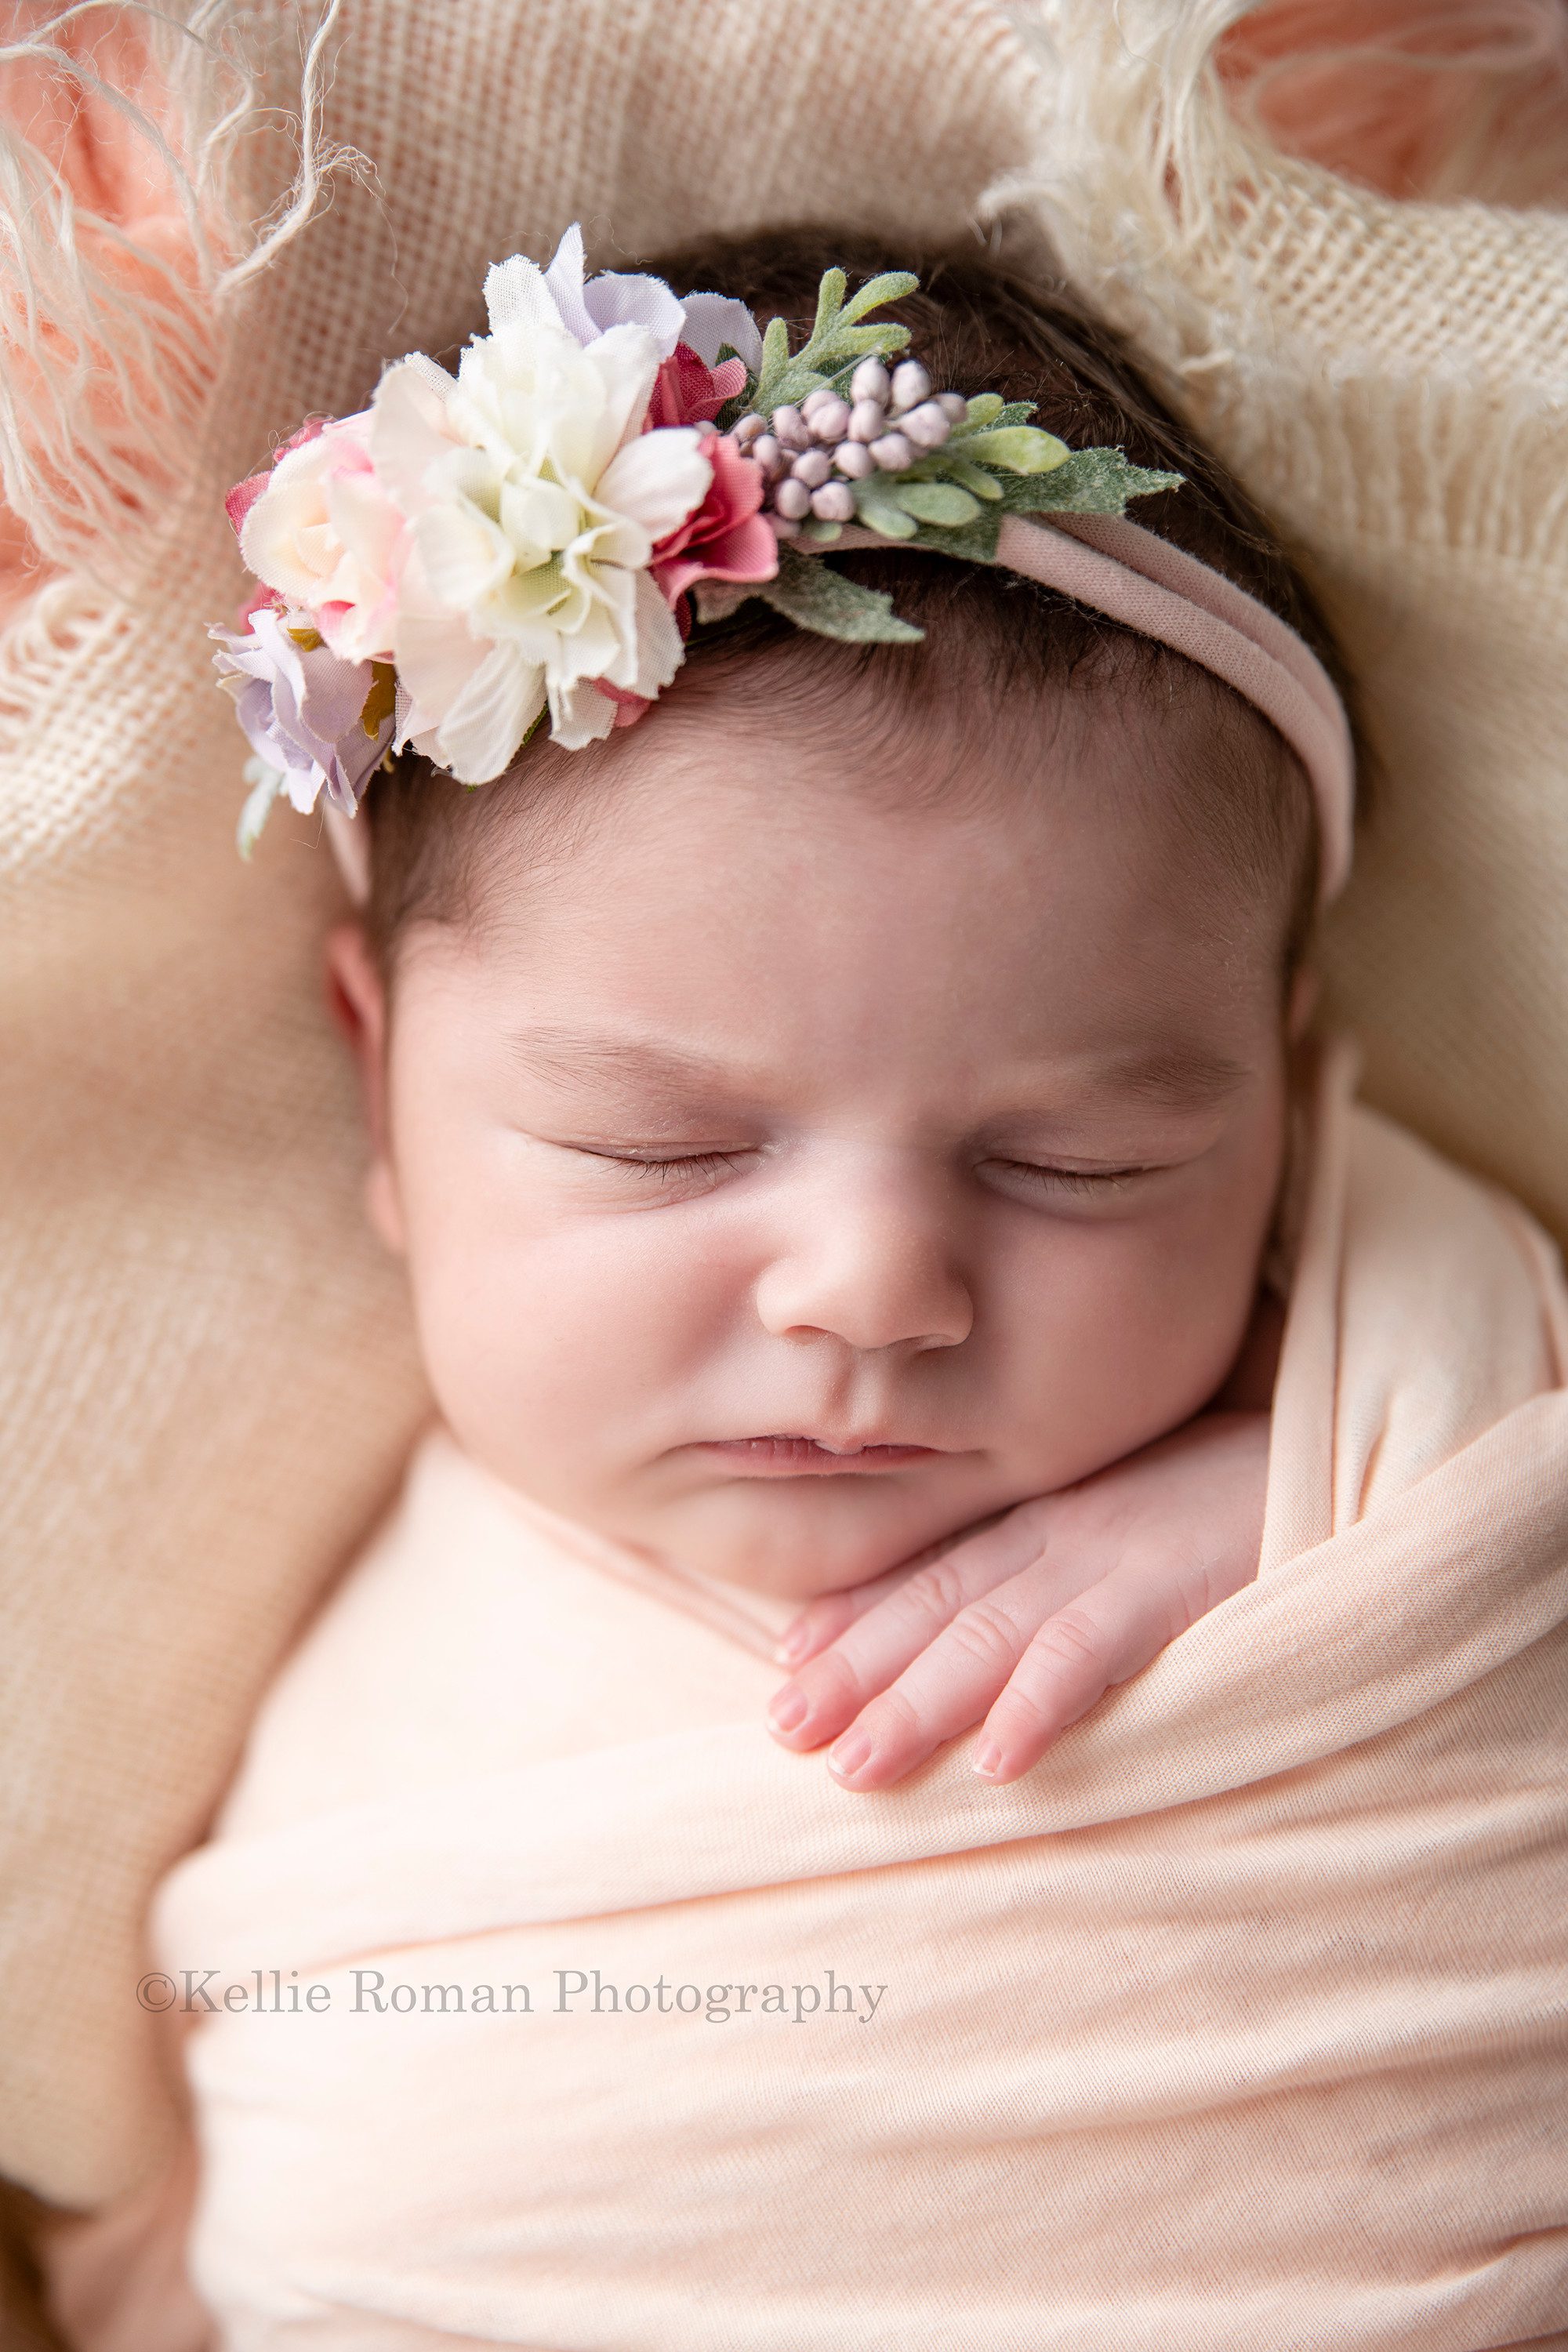 newborn pics a close up of a baby girl wrapped in a peach swaddle she is sleeping and has one hand out of the swaddle wrap she has a floral headband on